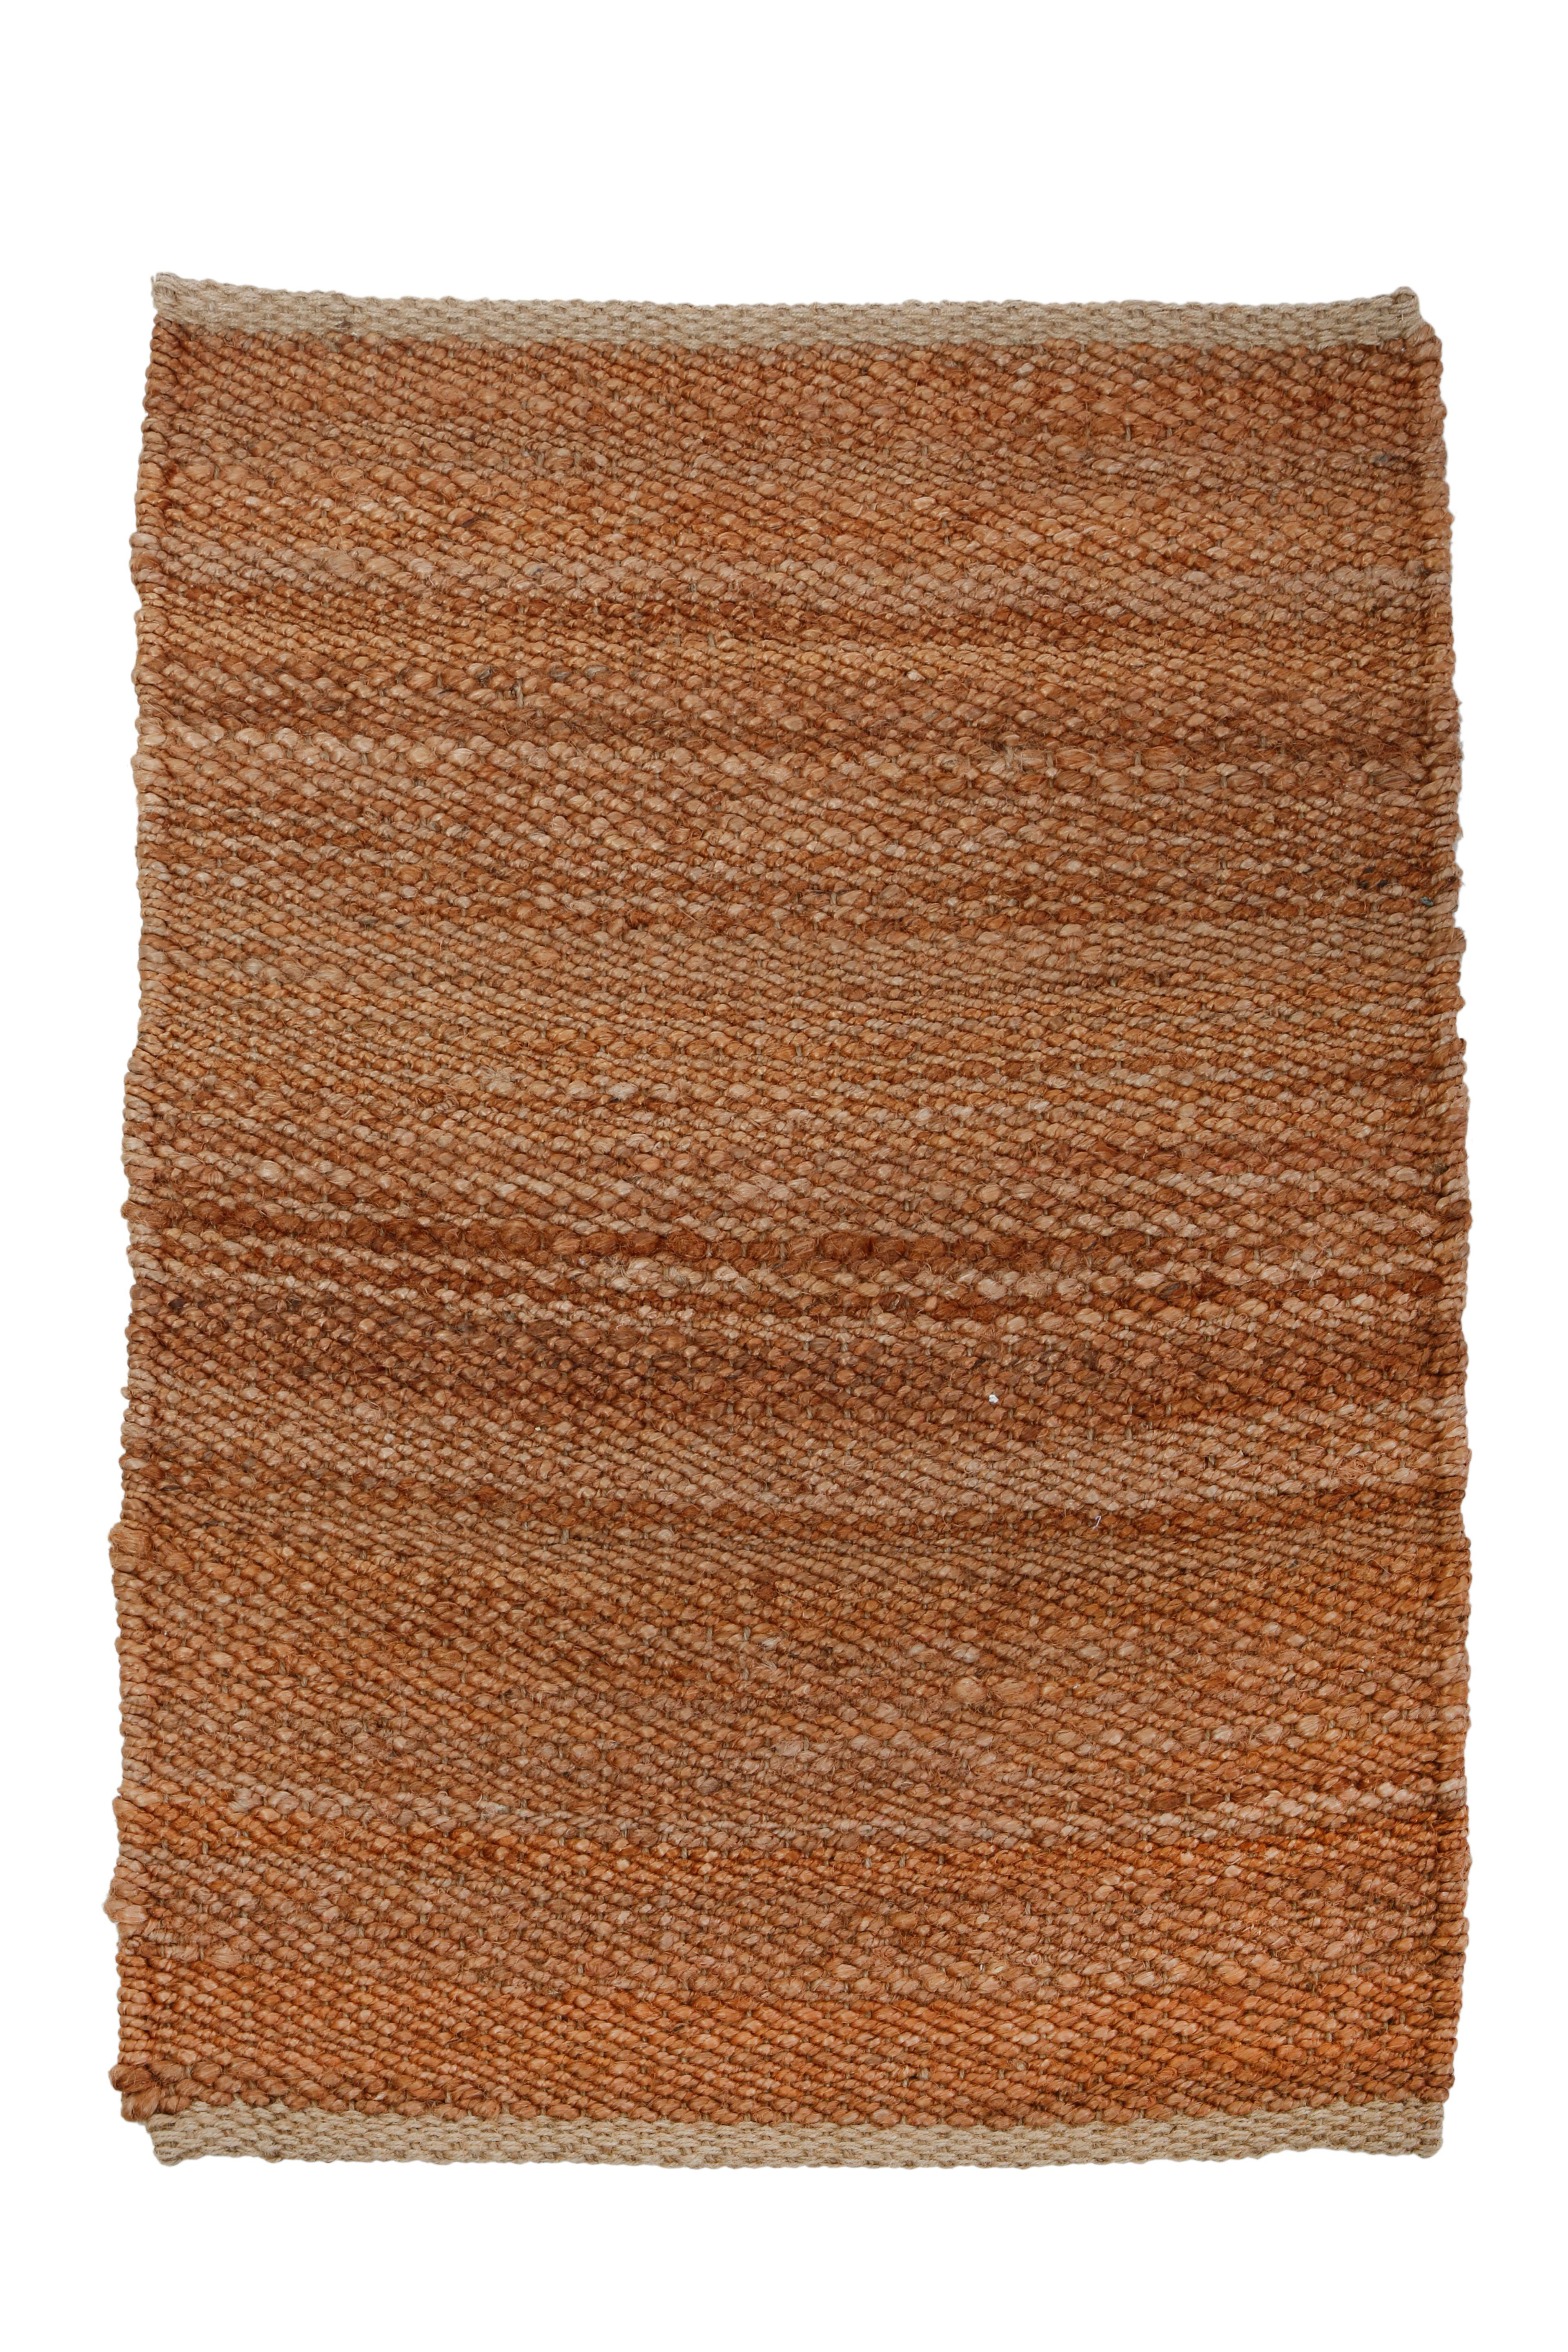 Andes Outdoor Sisal Polypropylene Rug Collection